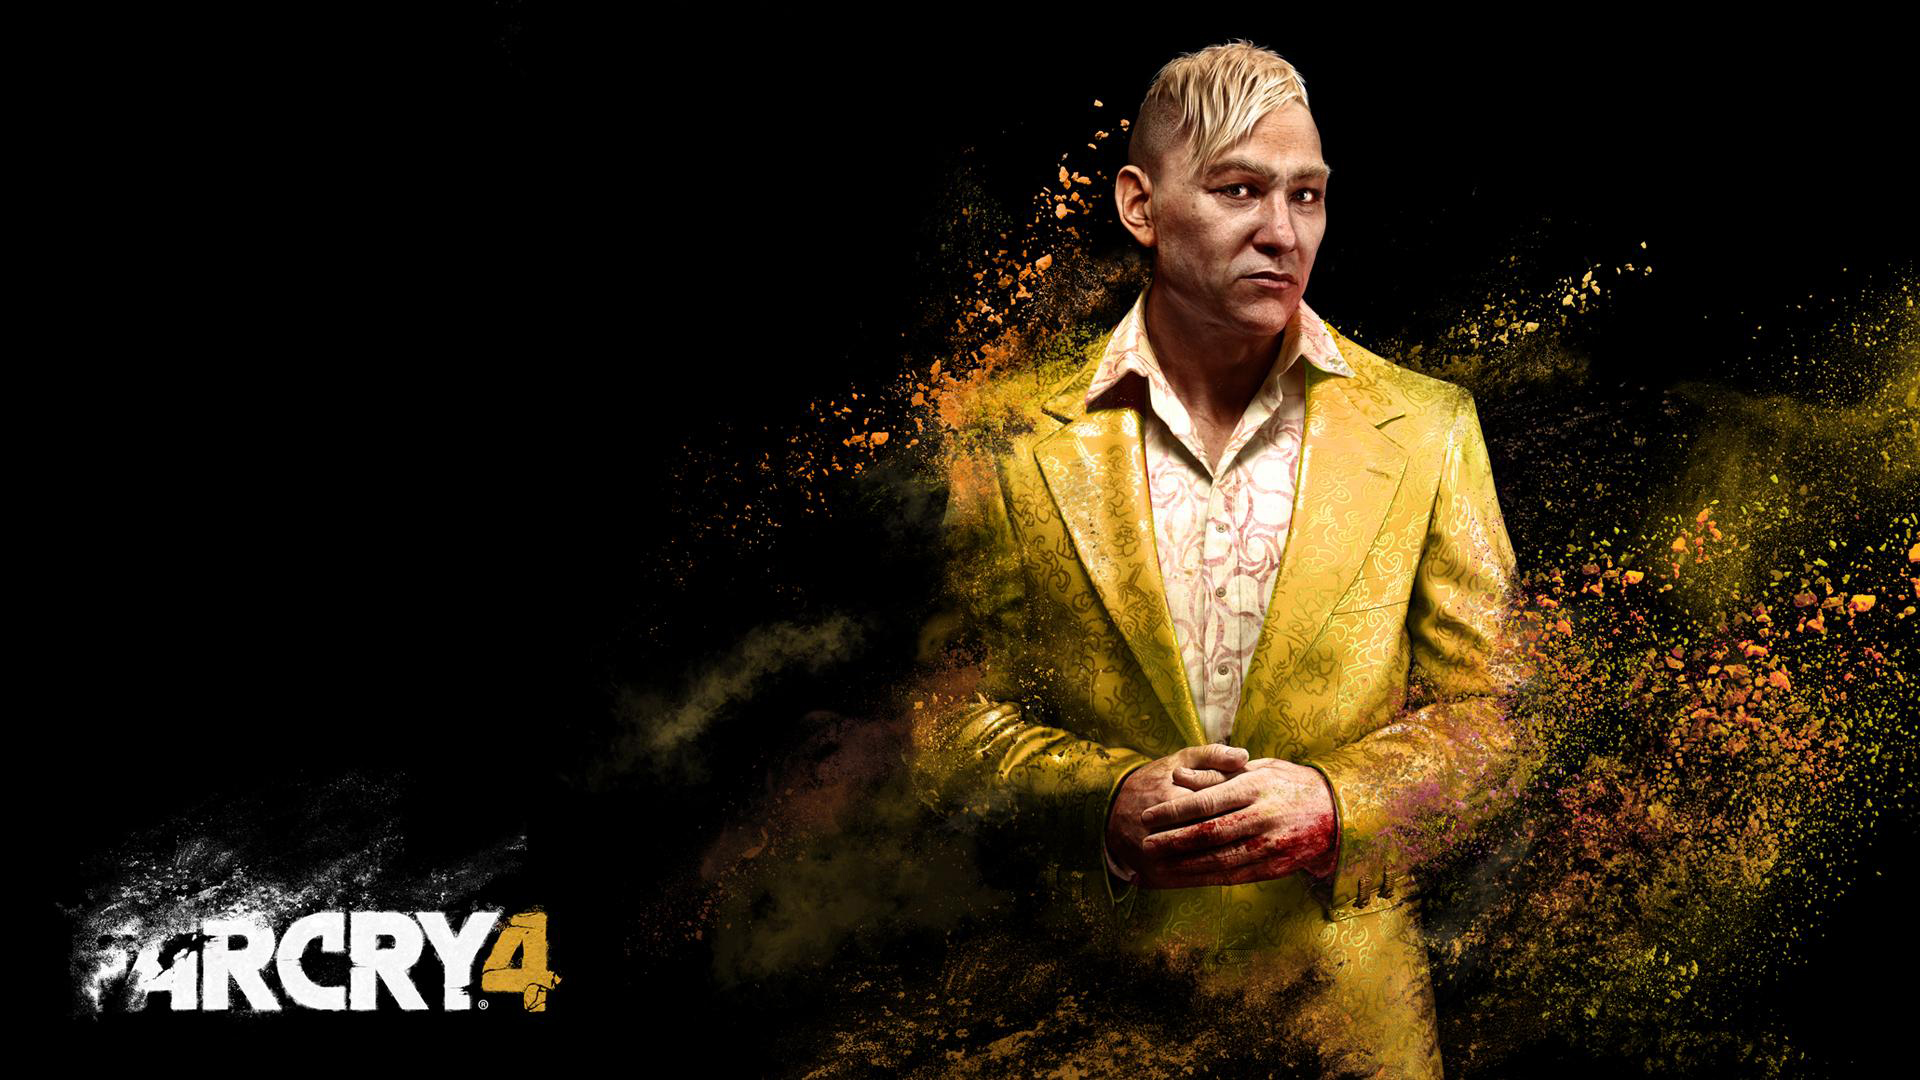 Far Cry 4 Hd Wallpaper Background Image 1920x1080 Id552604